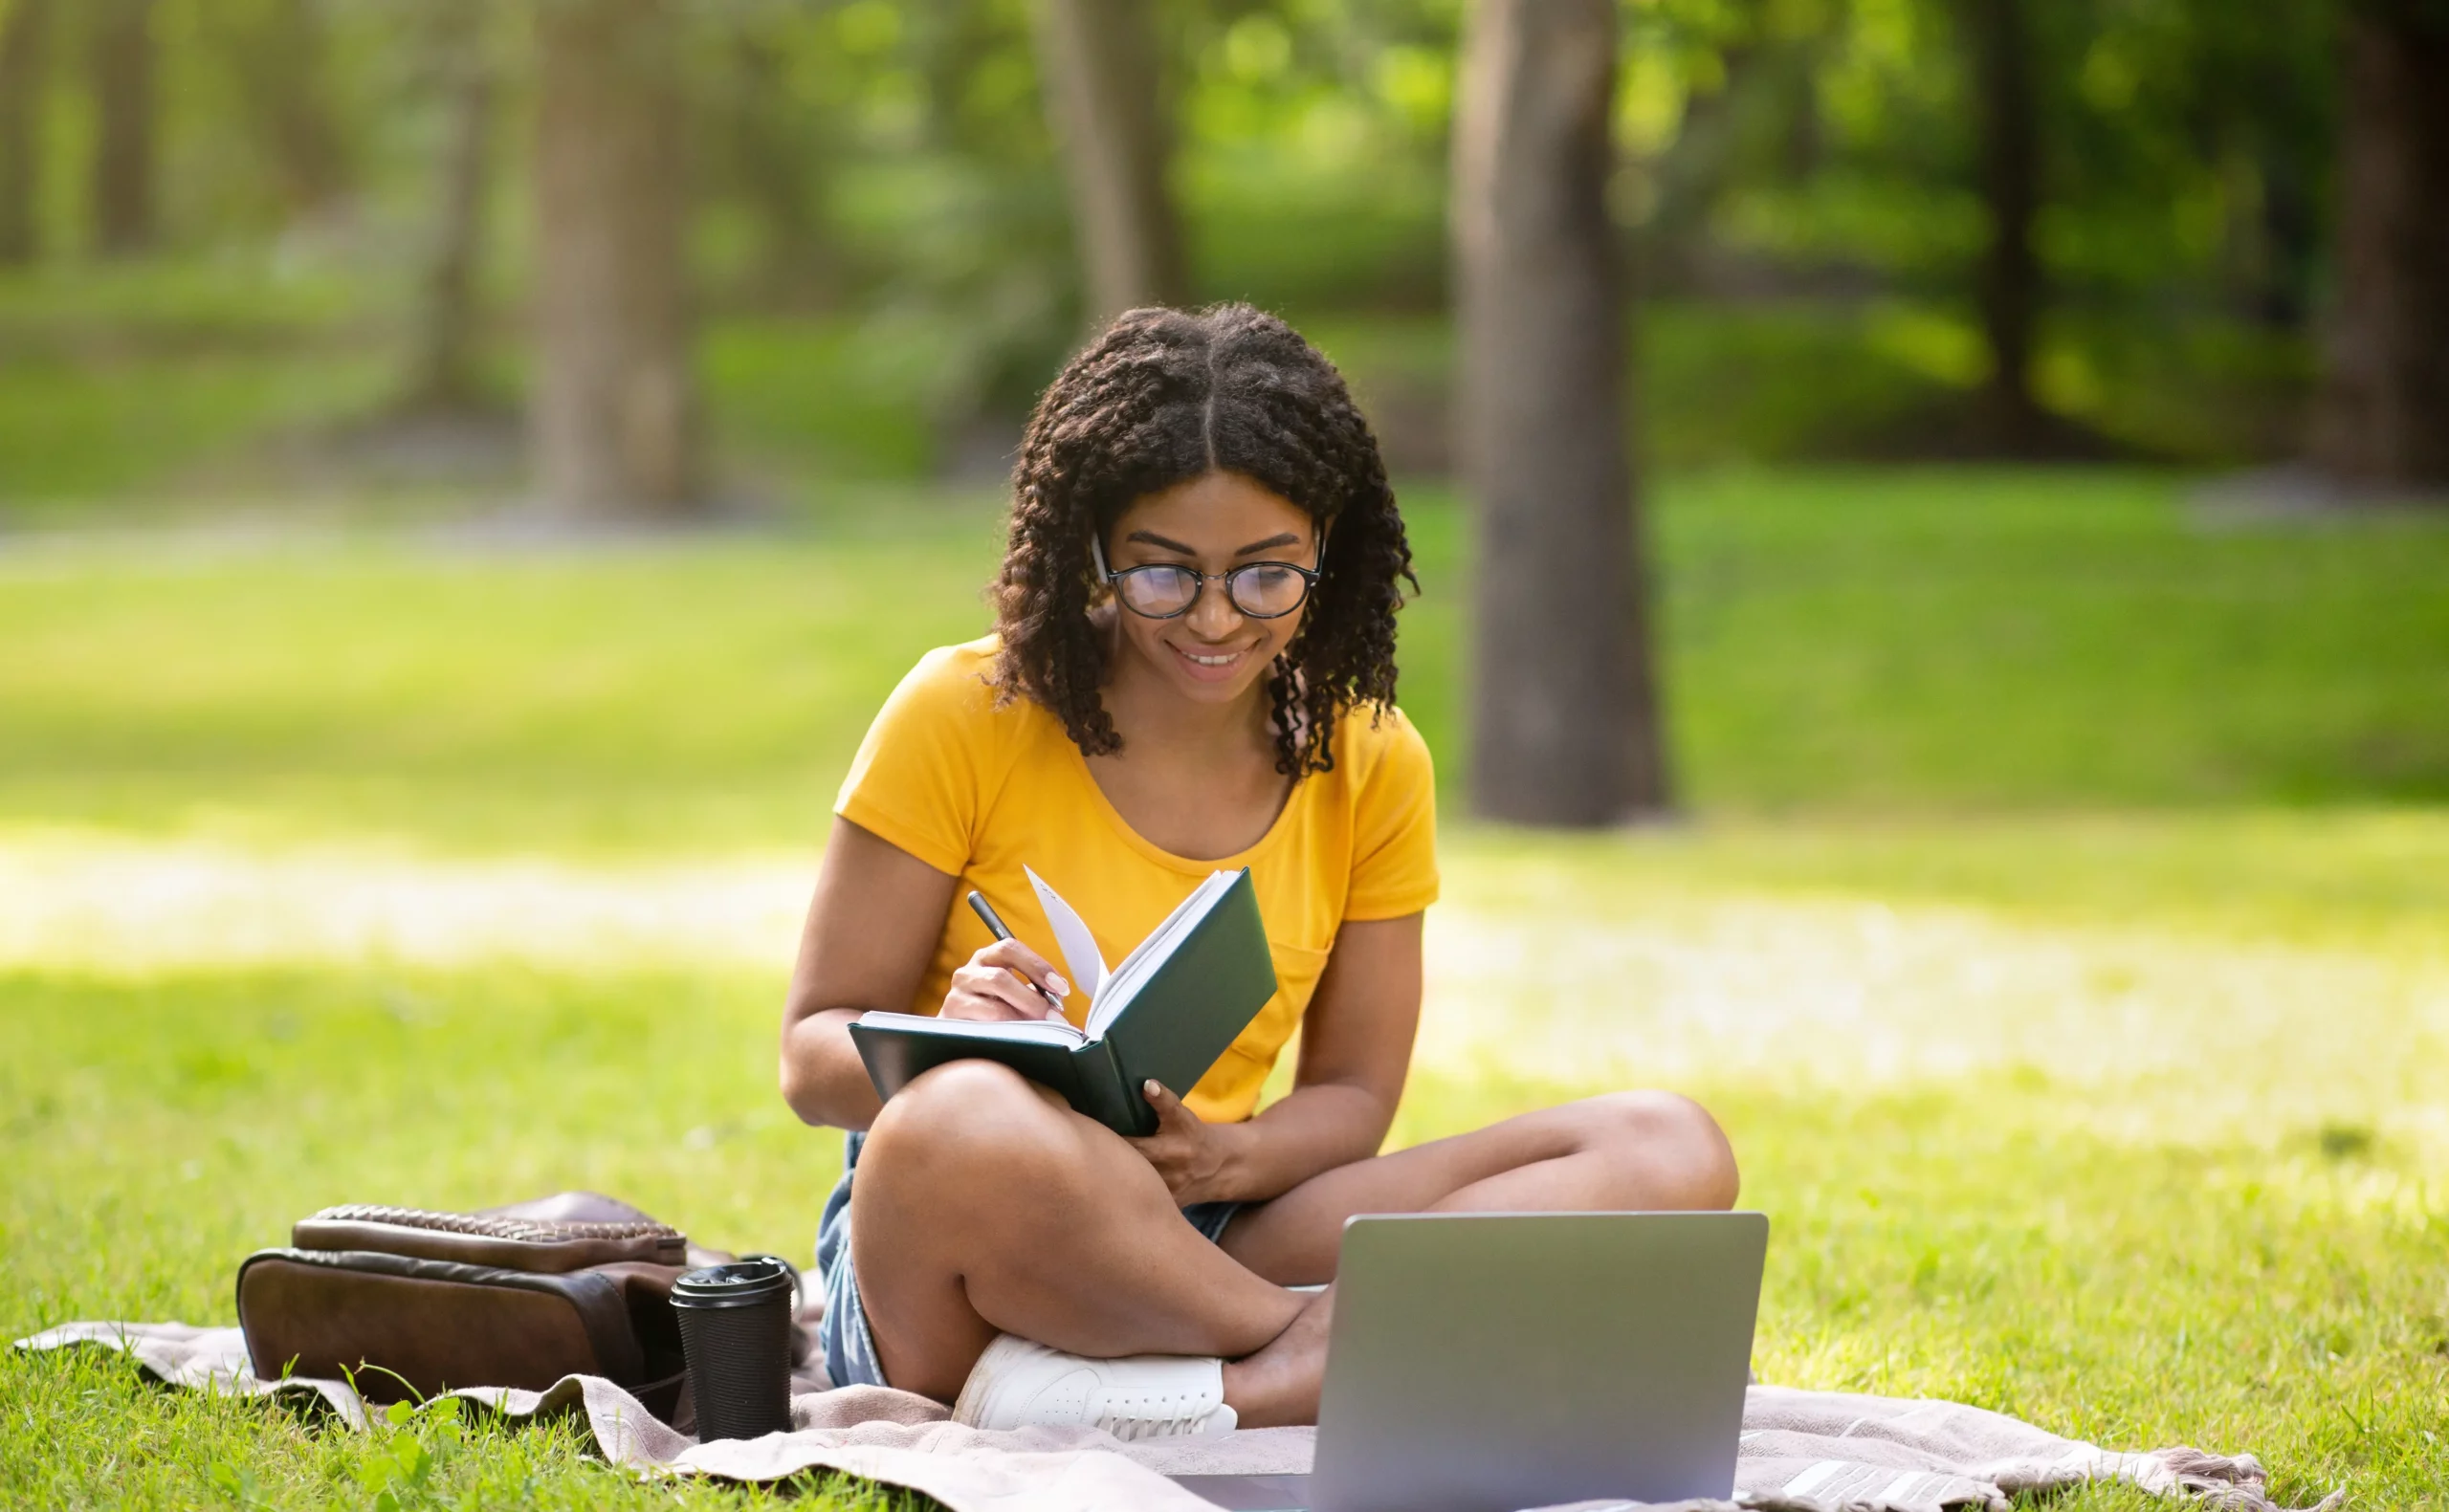 A young woman sitting on the grass with a laptop in her lap.